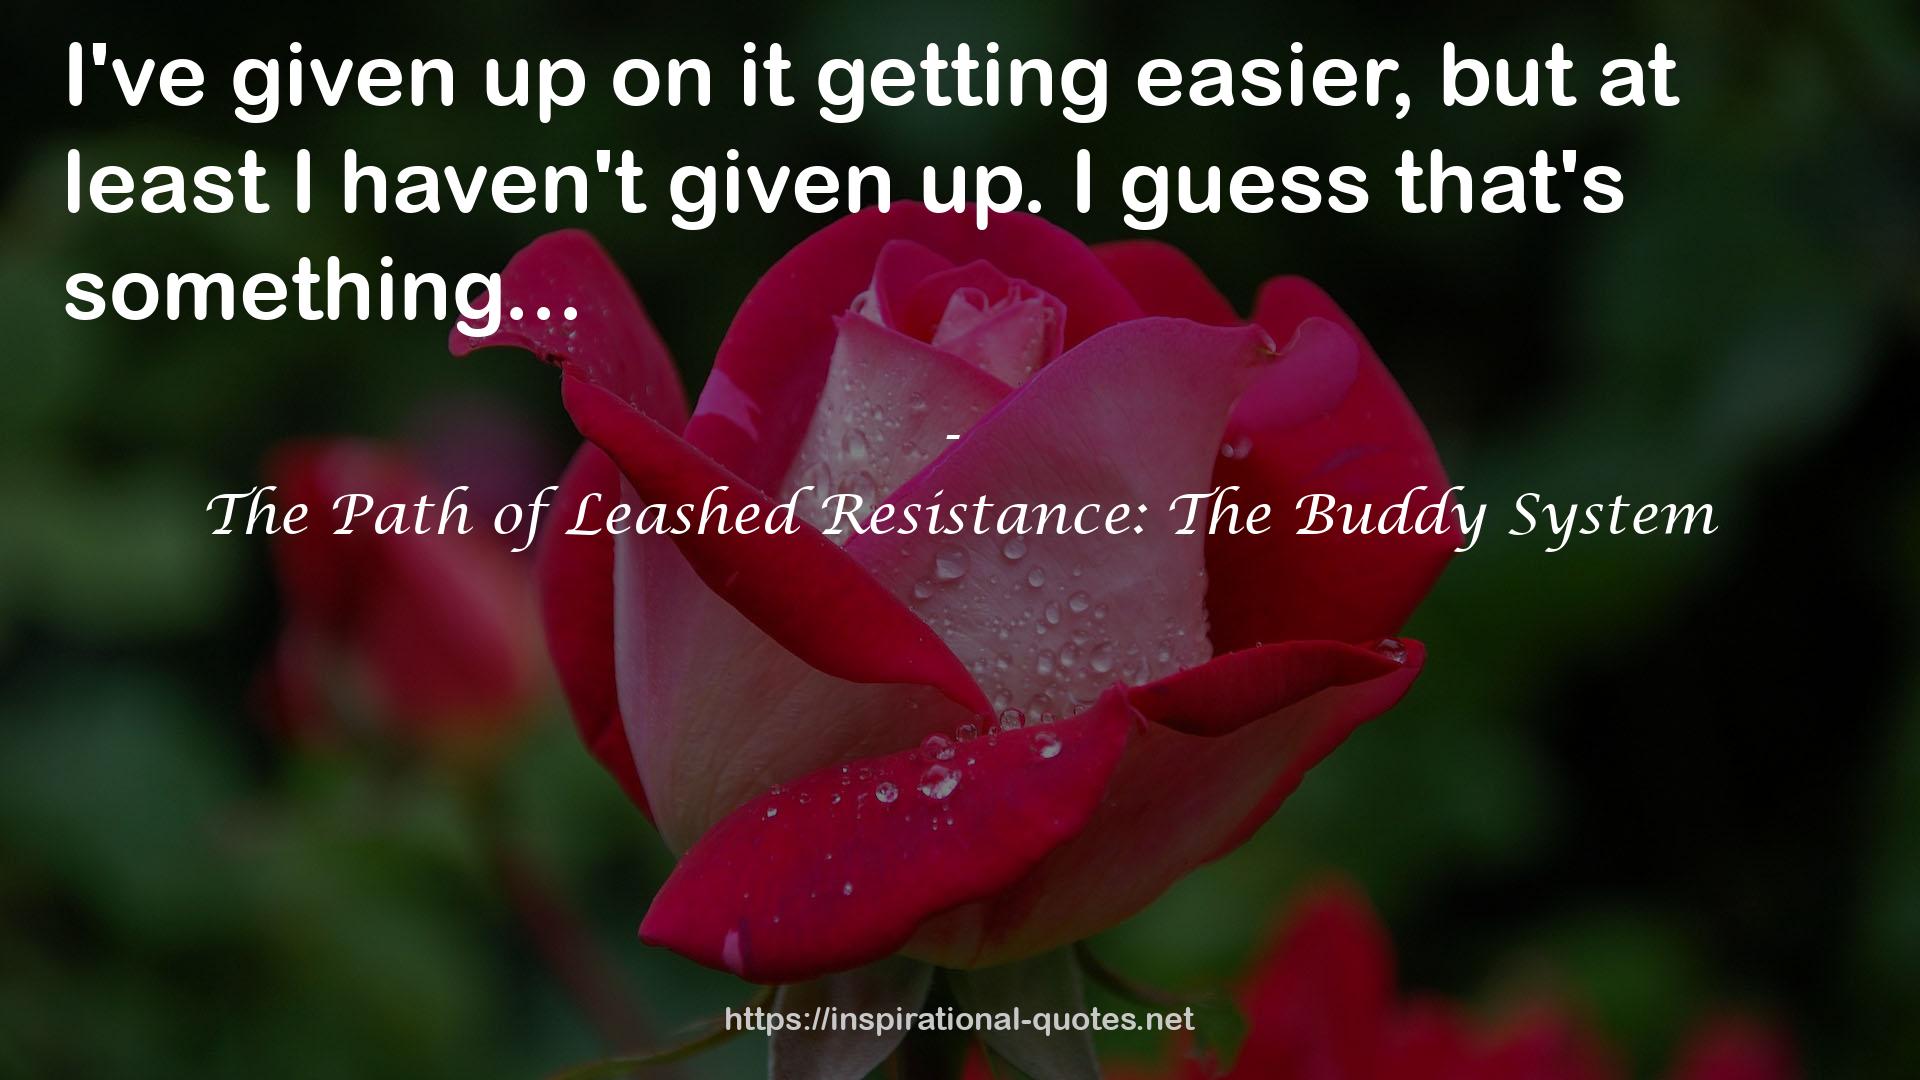 The Path of Leashed Resistance: The Buddy System QUOTES